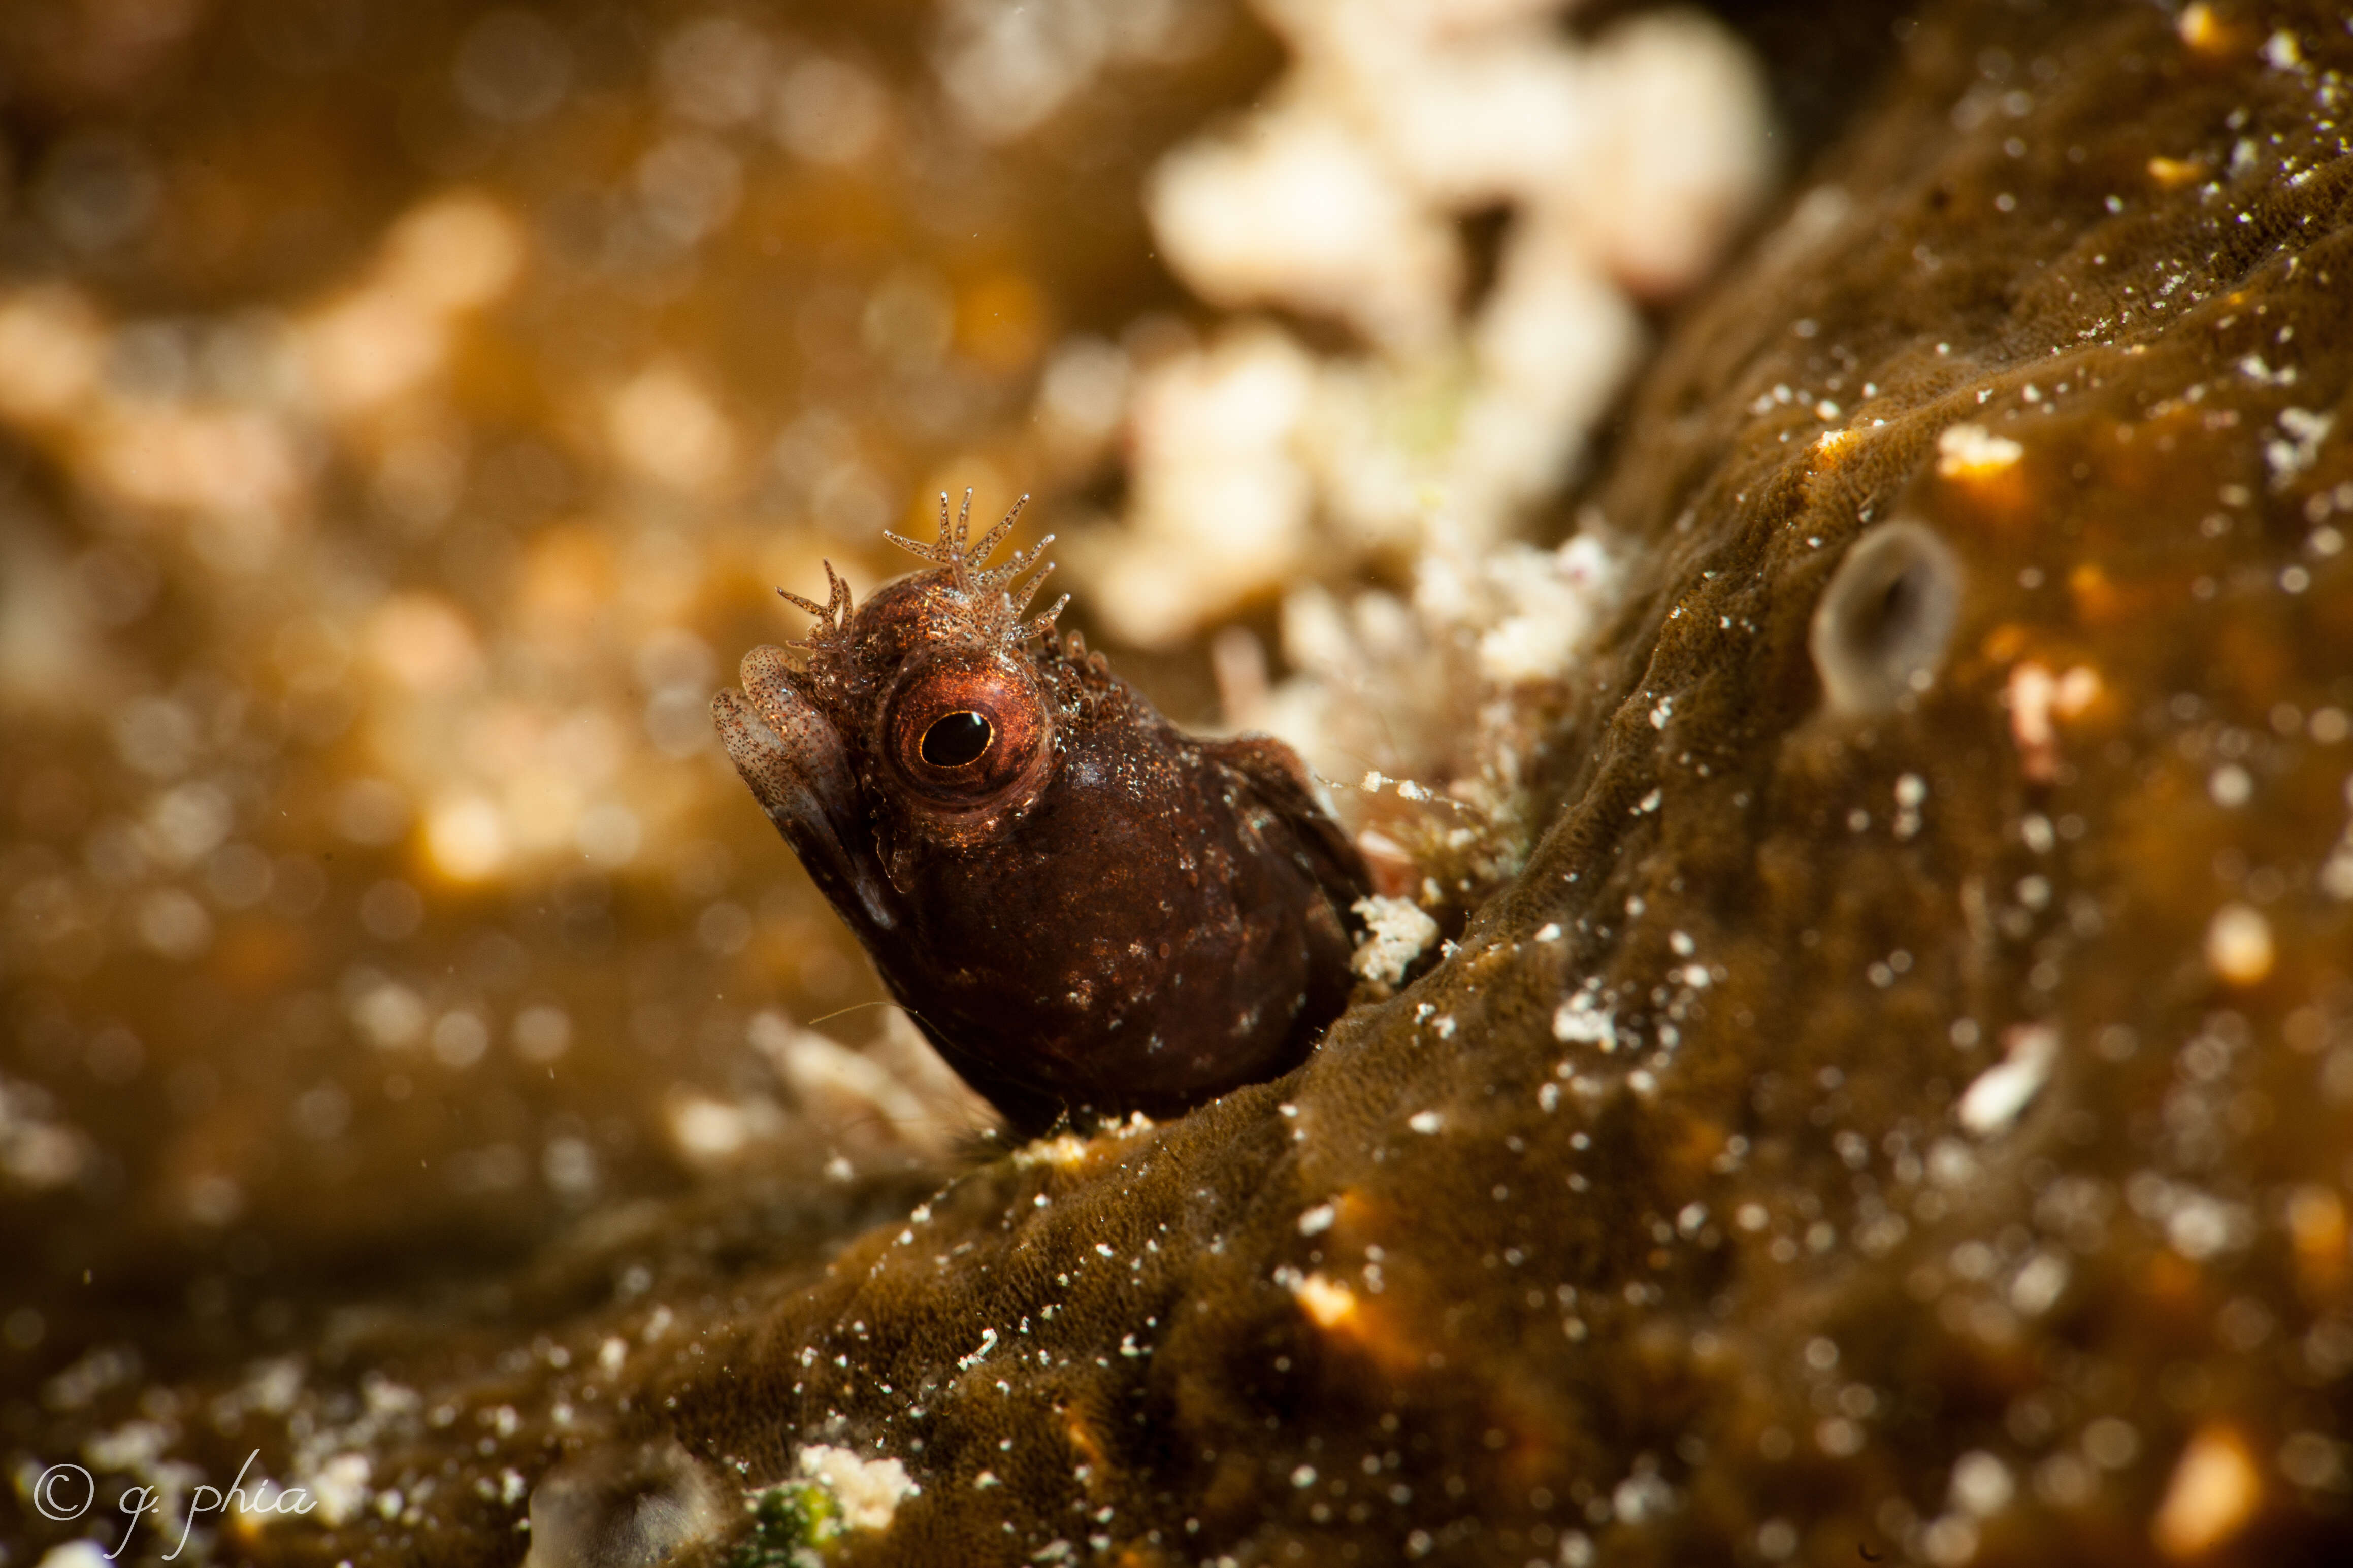 Image of Roughhead Blenny